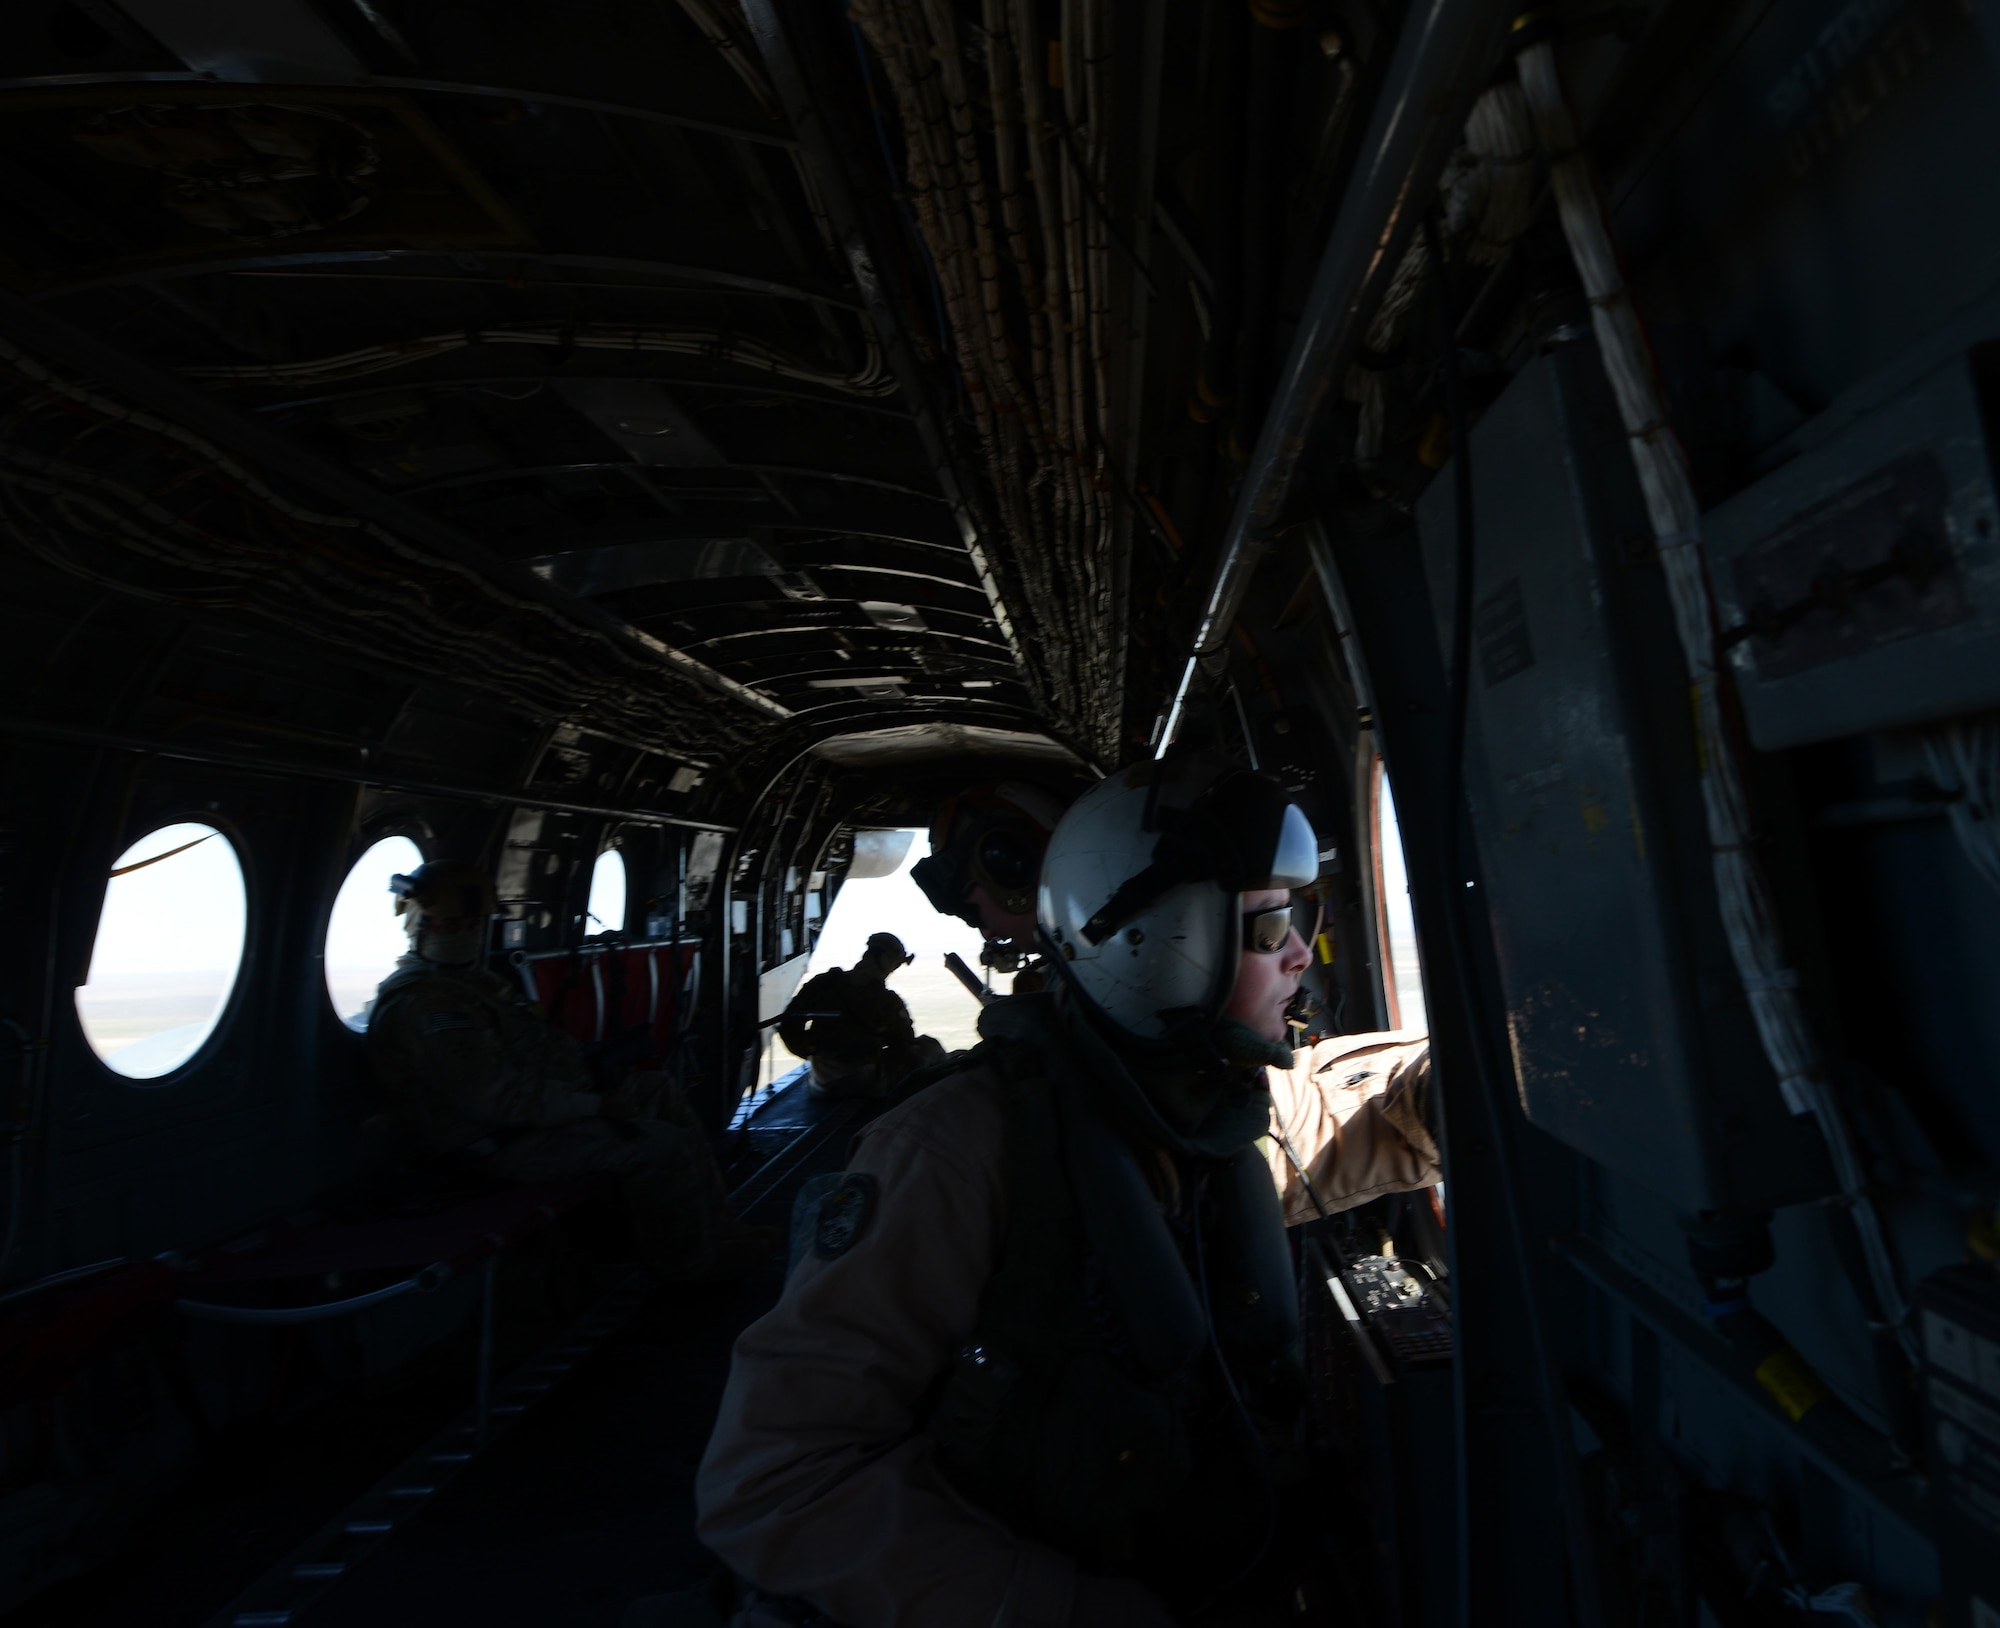 A Marine inside a CH-46 Sea Knight helicopter as it takes off March 13, 2014, from Mountain Home Air Force Base, Idaho. Marines from the 3rd Marine Aircraft Wing at Marine Corps Air Station Miramar, Calif., are currently at MHAFB participating in Gunfighter Flag.  The exercise is designed to prepare multiple joint and coalition terminal attack controller teams for upcoming deployments as well as provide proficiency training for aircrews. (U.S. Air Force photo by Senior Airman Benjamin Sutton/Released)